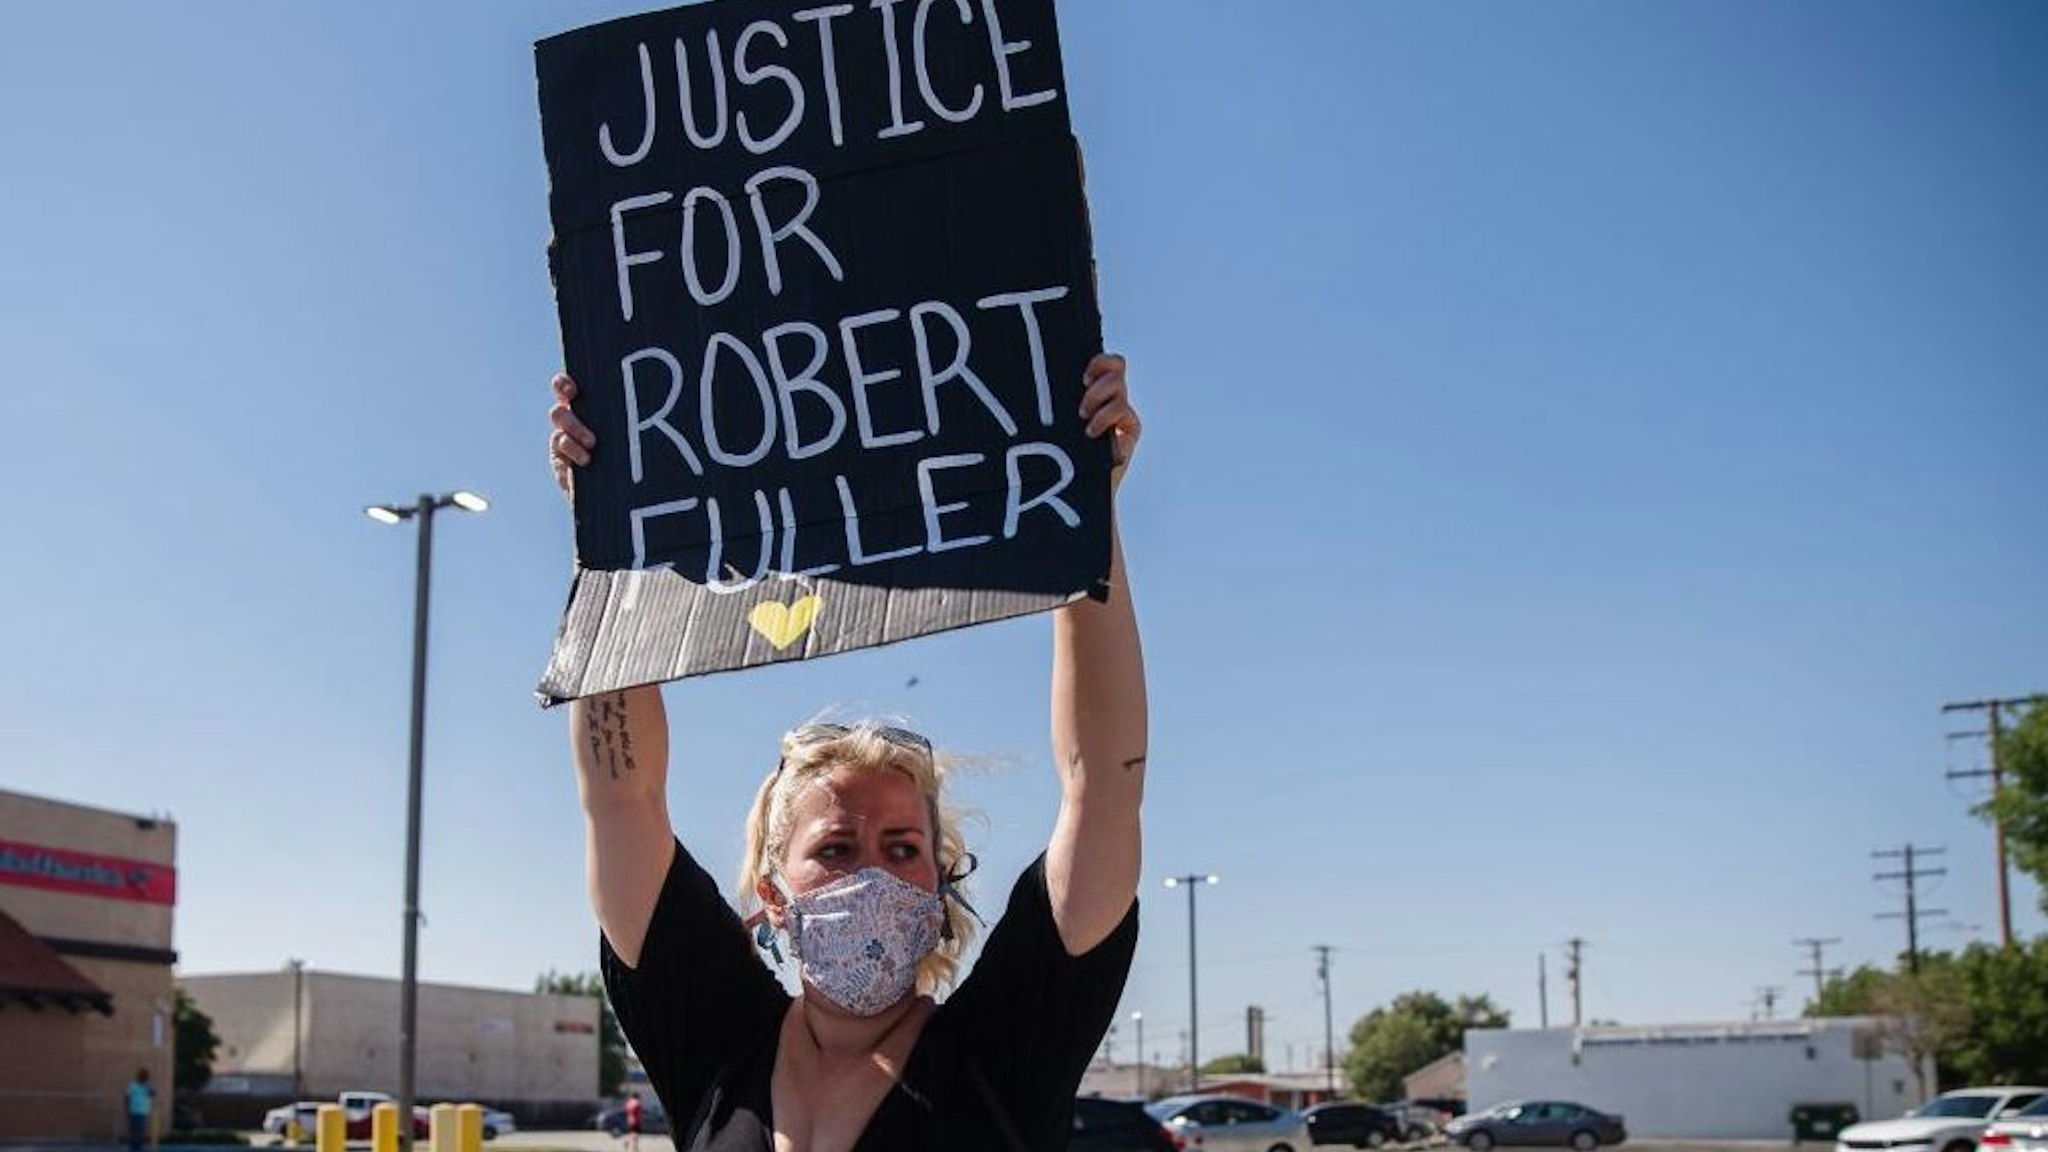 A protester holds up a placard on Palmdale Blvd as people gather to demand justice for Robert Fuller, a young black man who was found hanging from a tree, on June 16, 2020, in Palmdale, California.